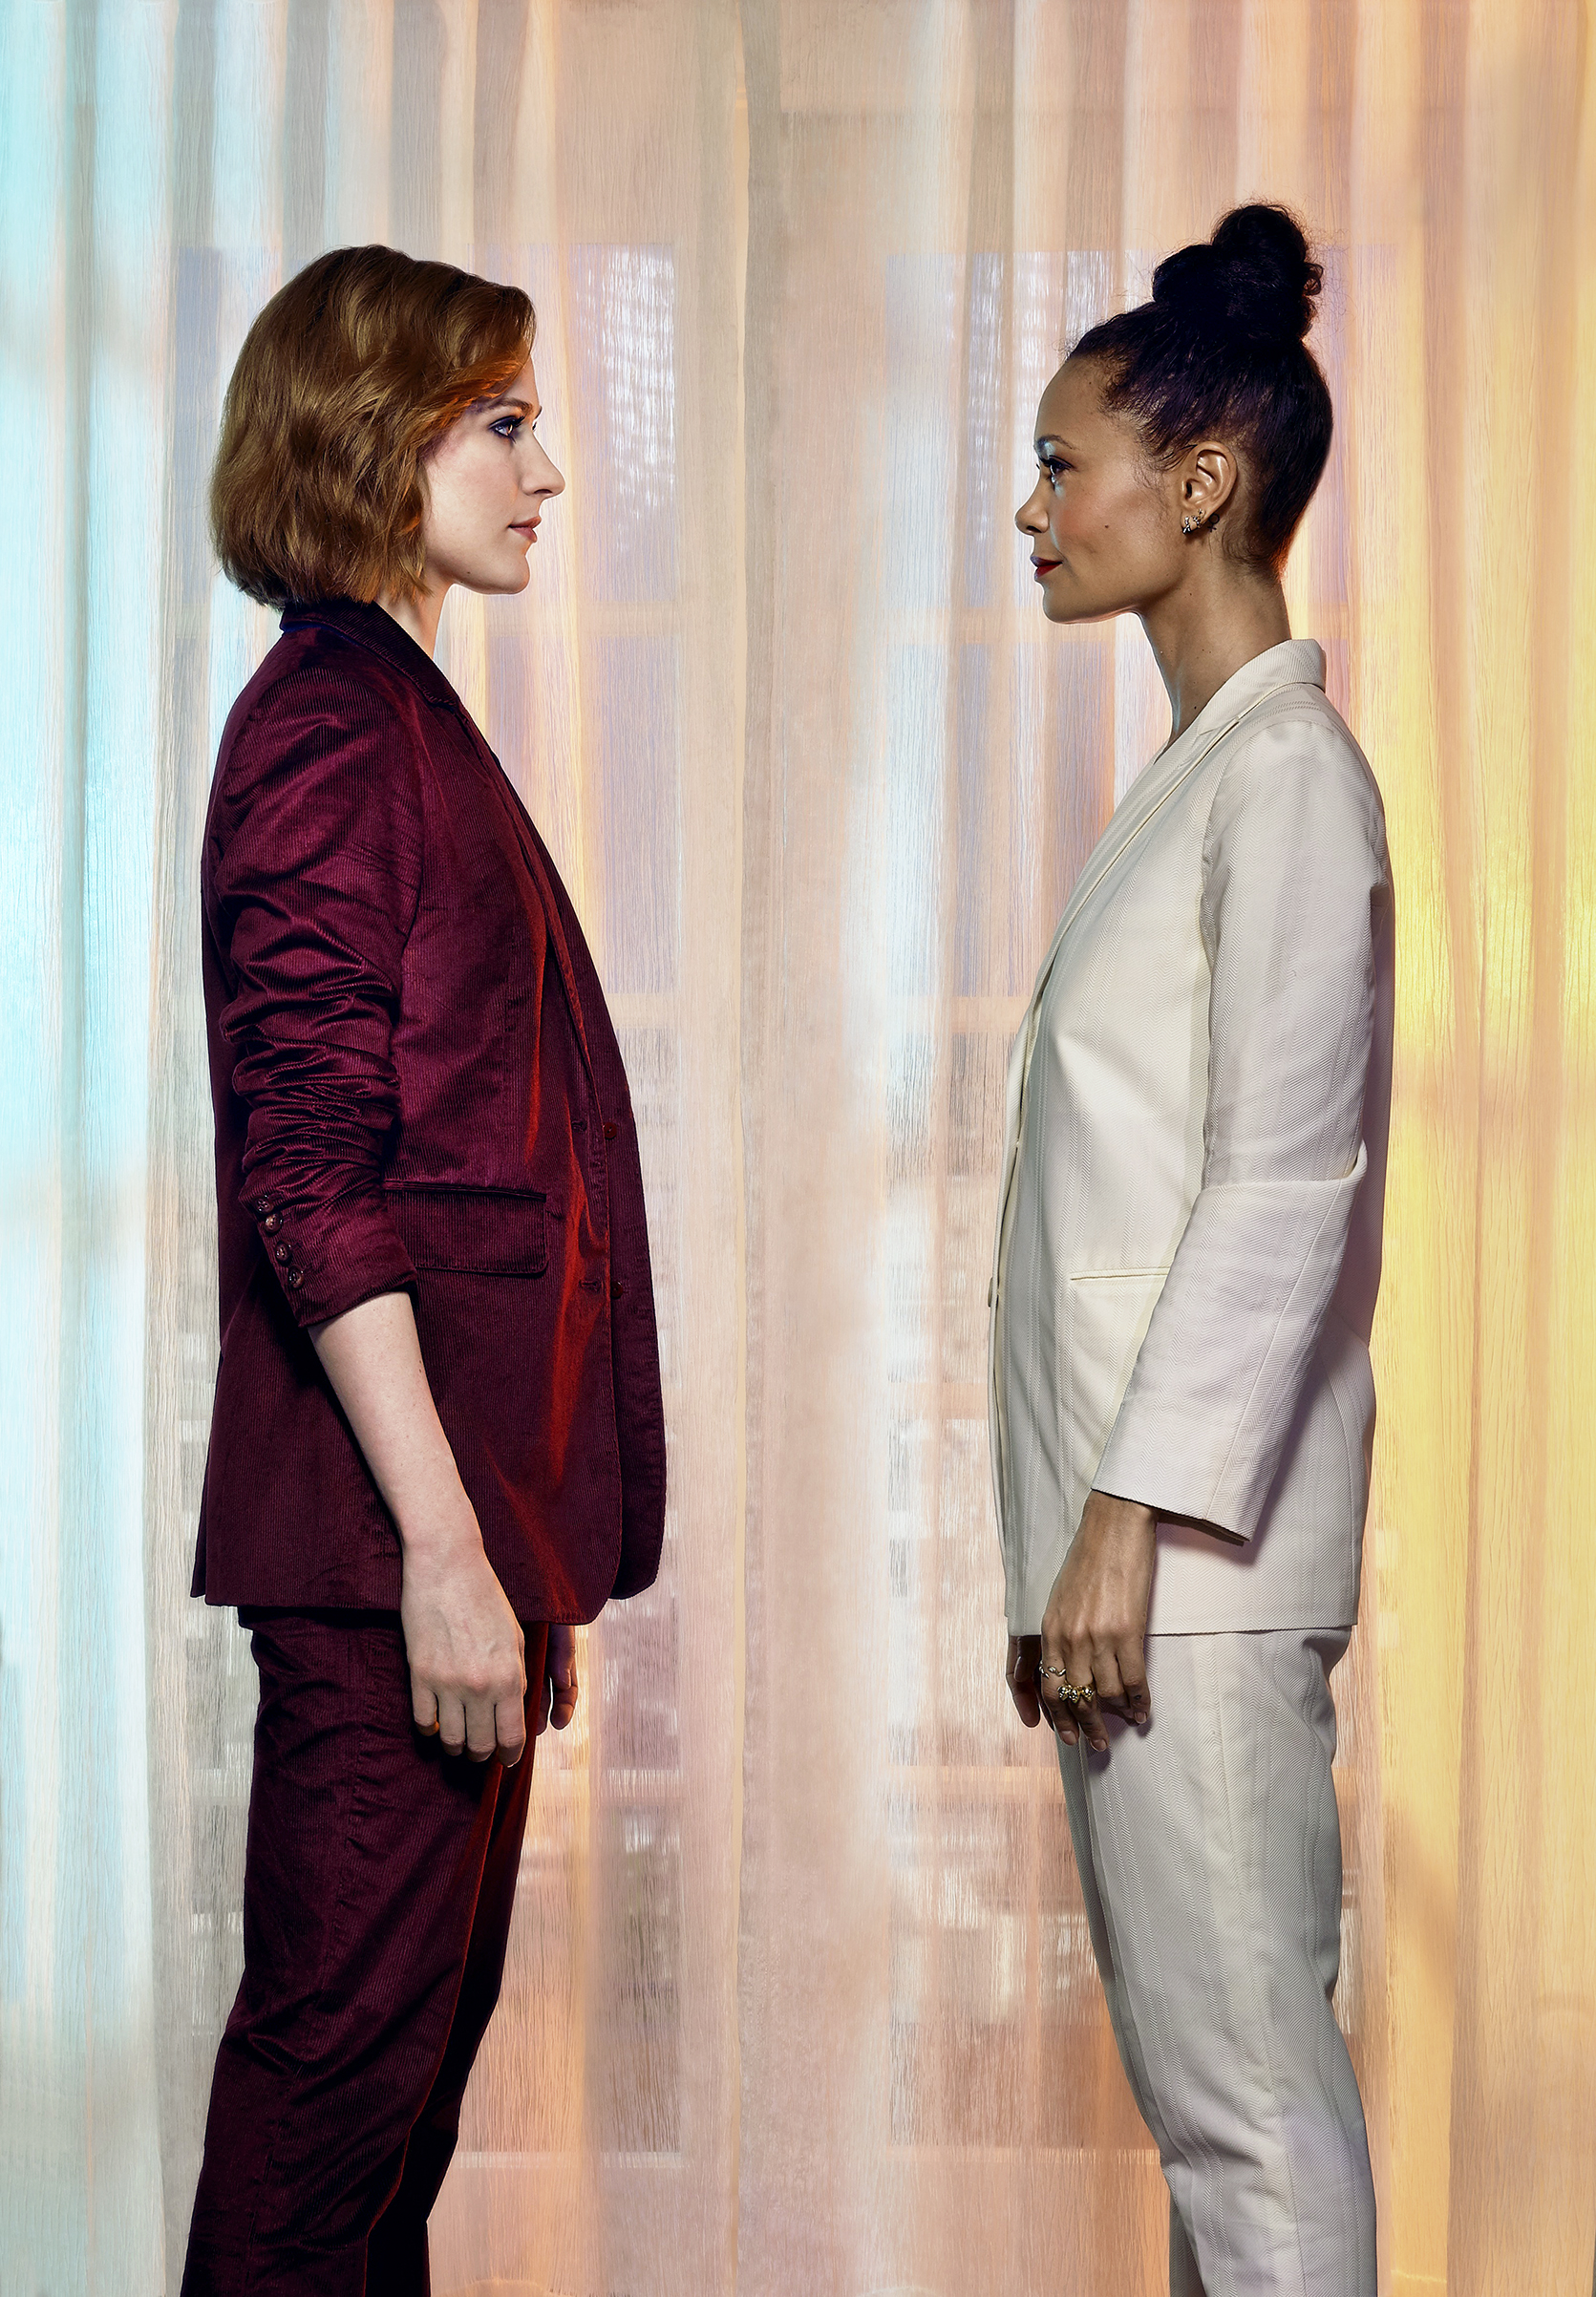 Actors Evan Rachel Wood and Thandie Newton have found new power in HBO’s prescient Westworld (Ryan Schude for TIME)